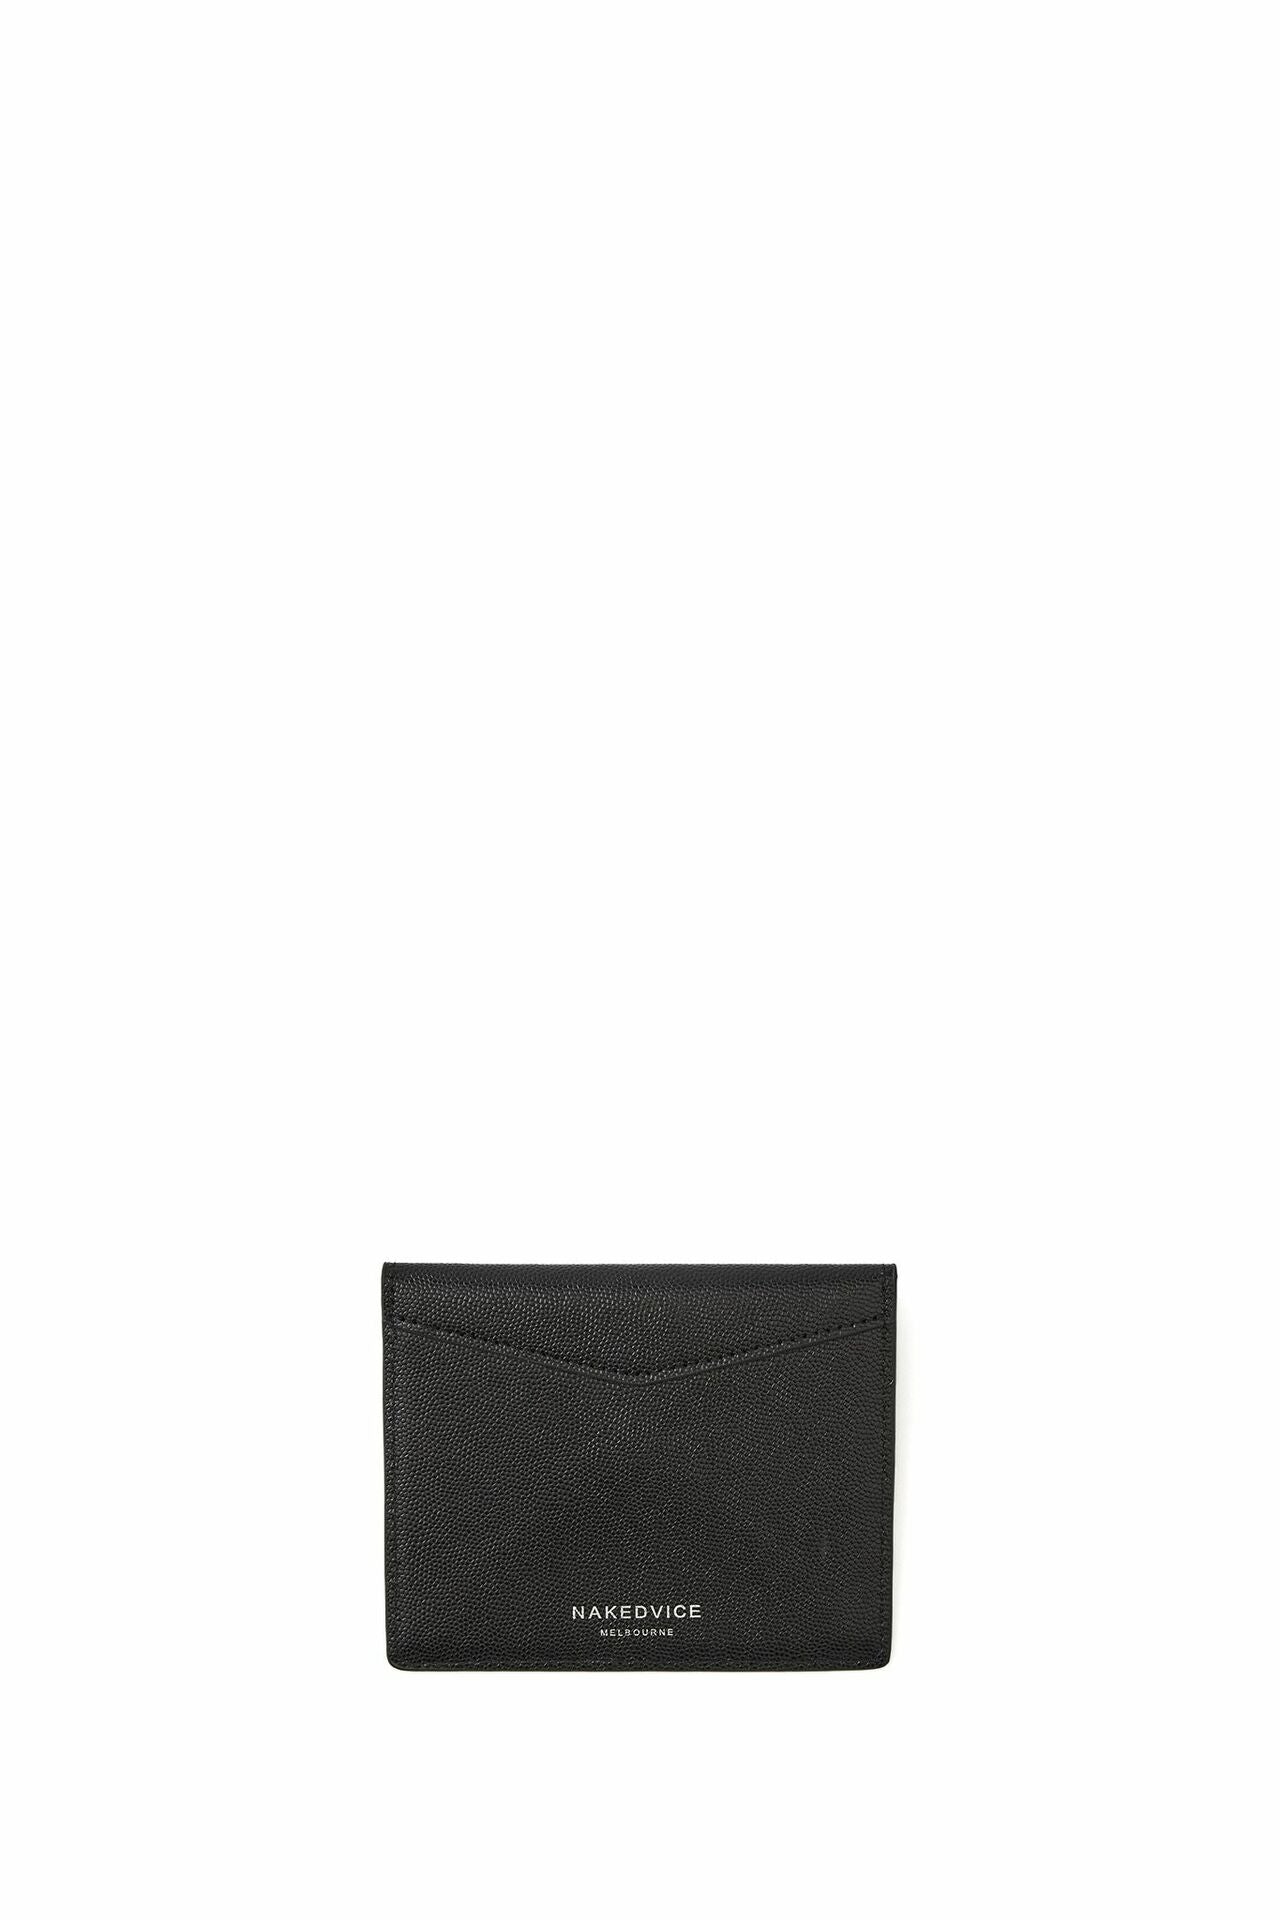 Nakedvice The Andie Leather Wallet